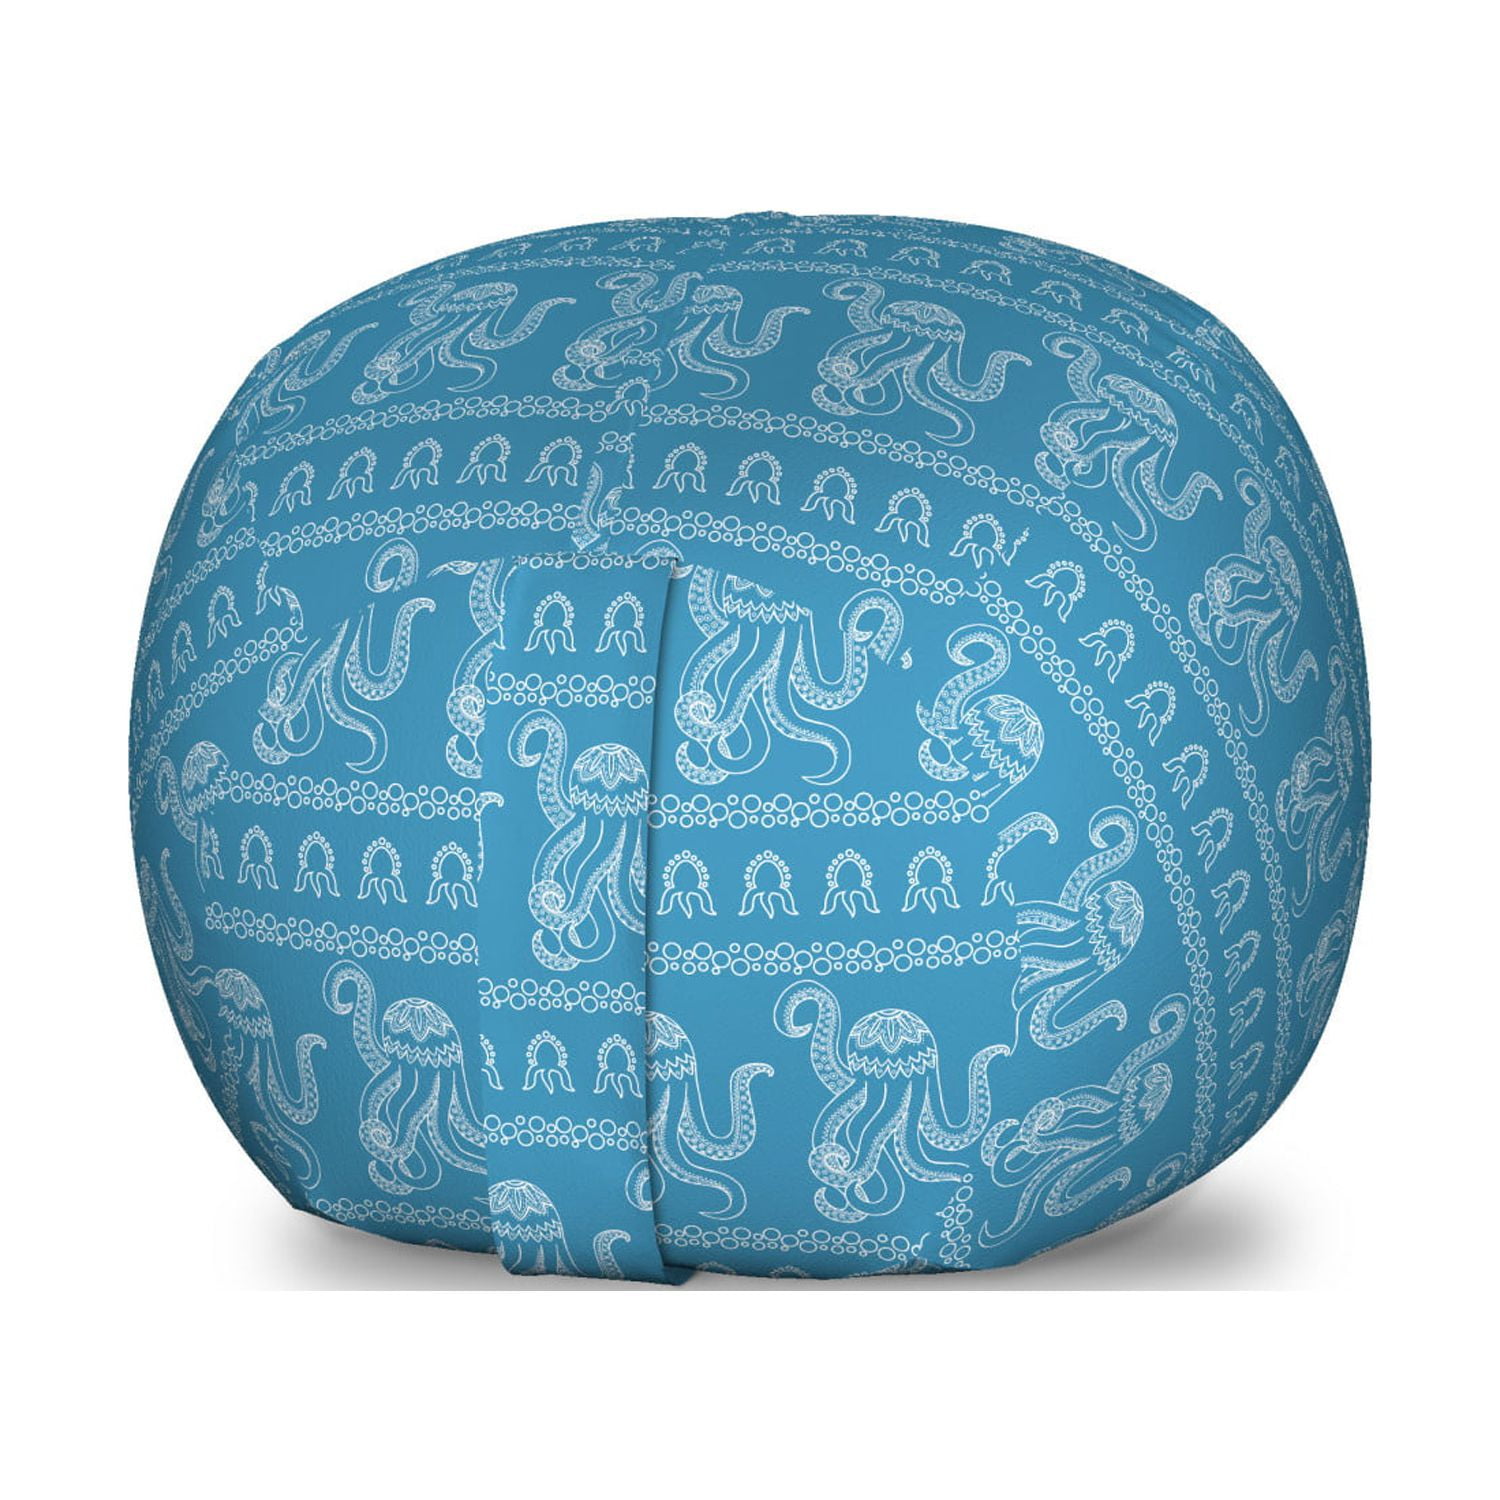 Fish Storage Toy Bag Chair, Aquarium Inspired Doodle Style